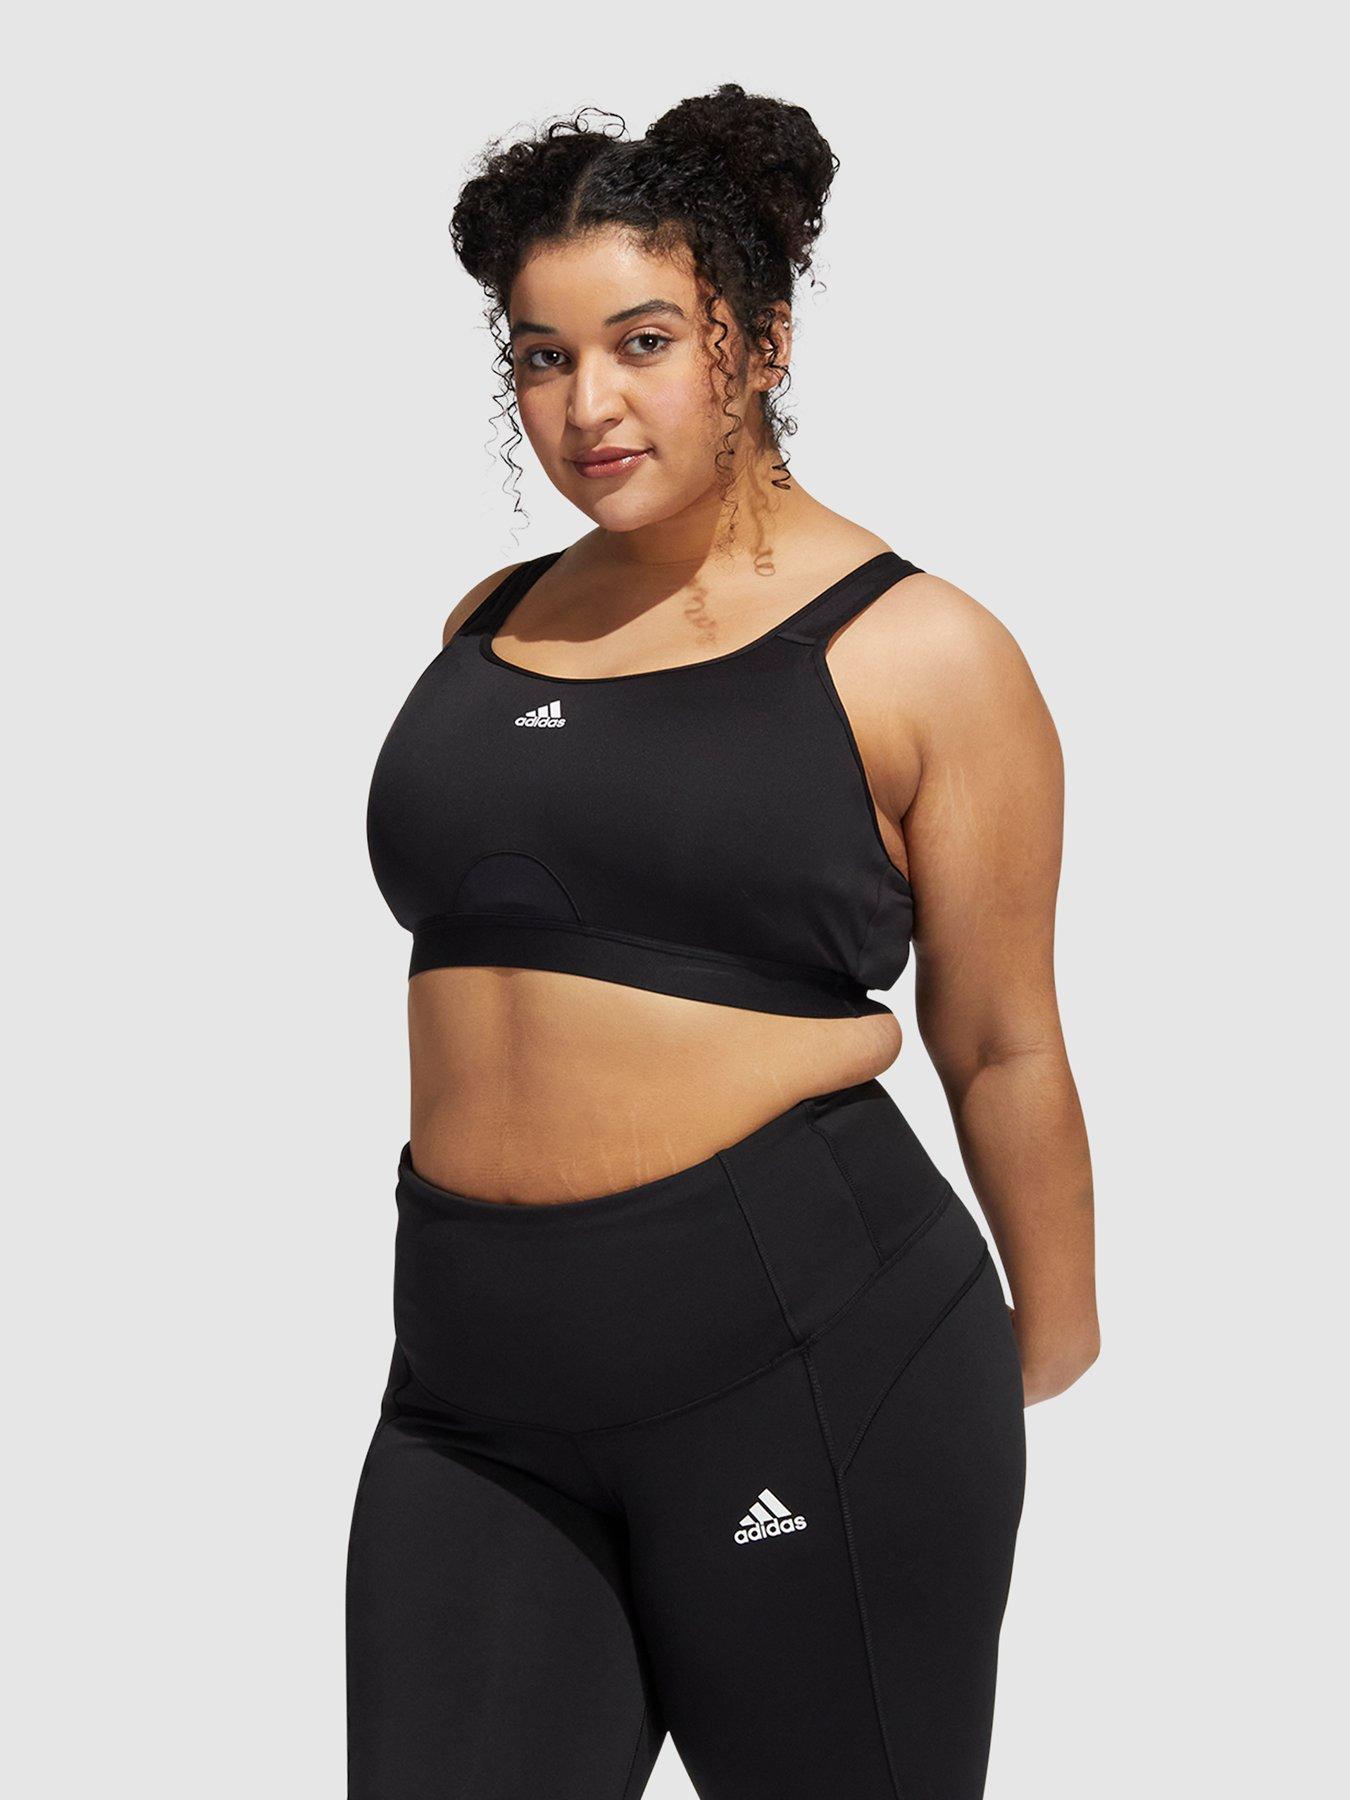 Plus Size 3XL-5XL) Top Sports Bra Front Zipper for Easy Wear Secure Comfty,  Women's Fashion, Activewear on Carousell